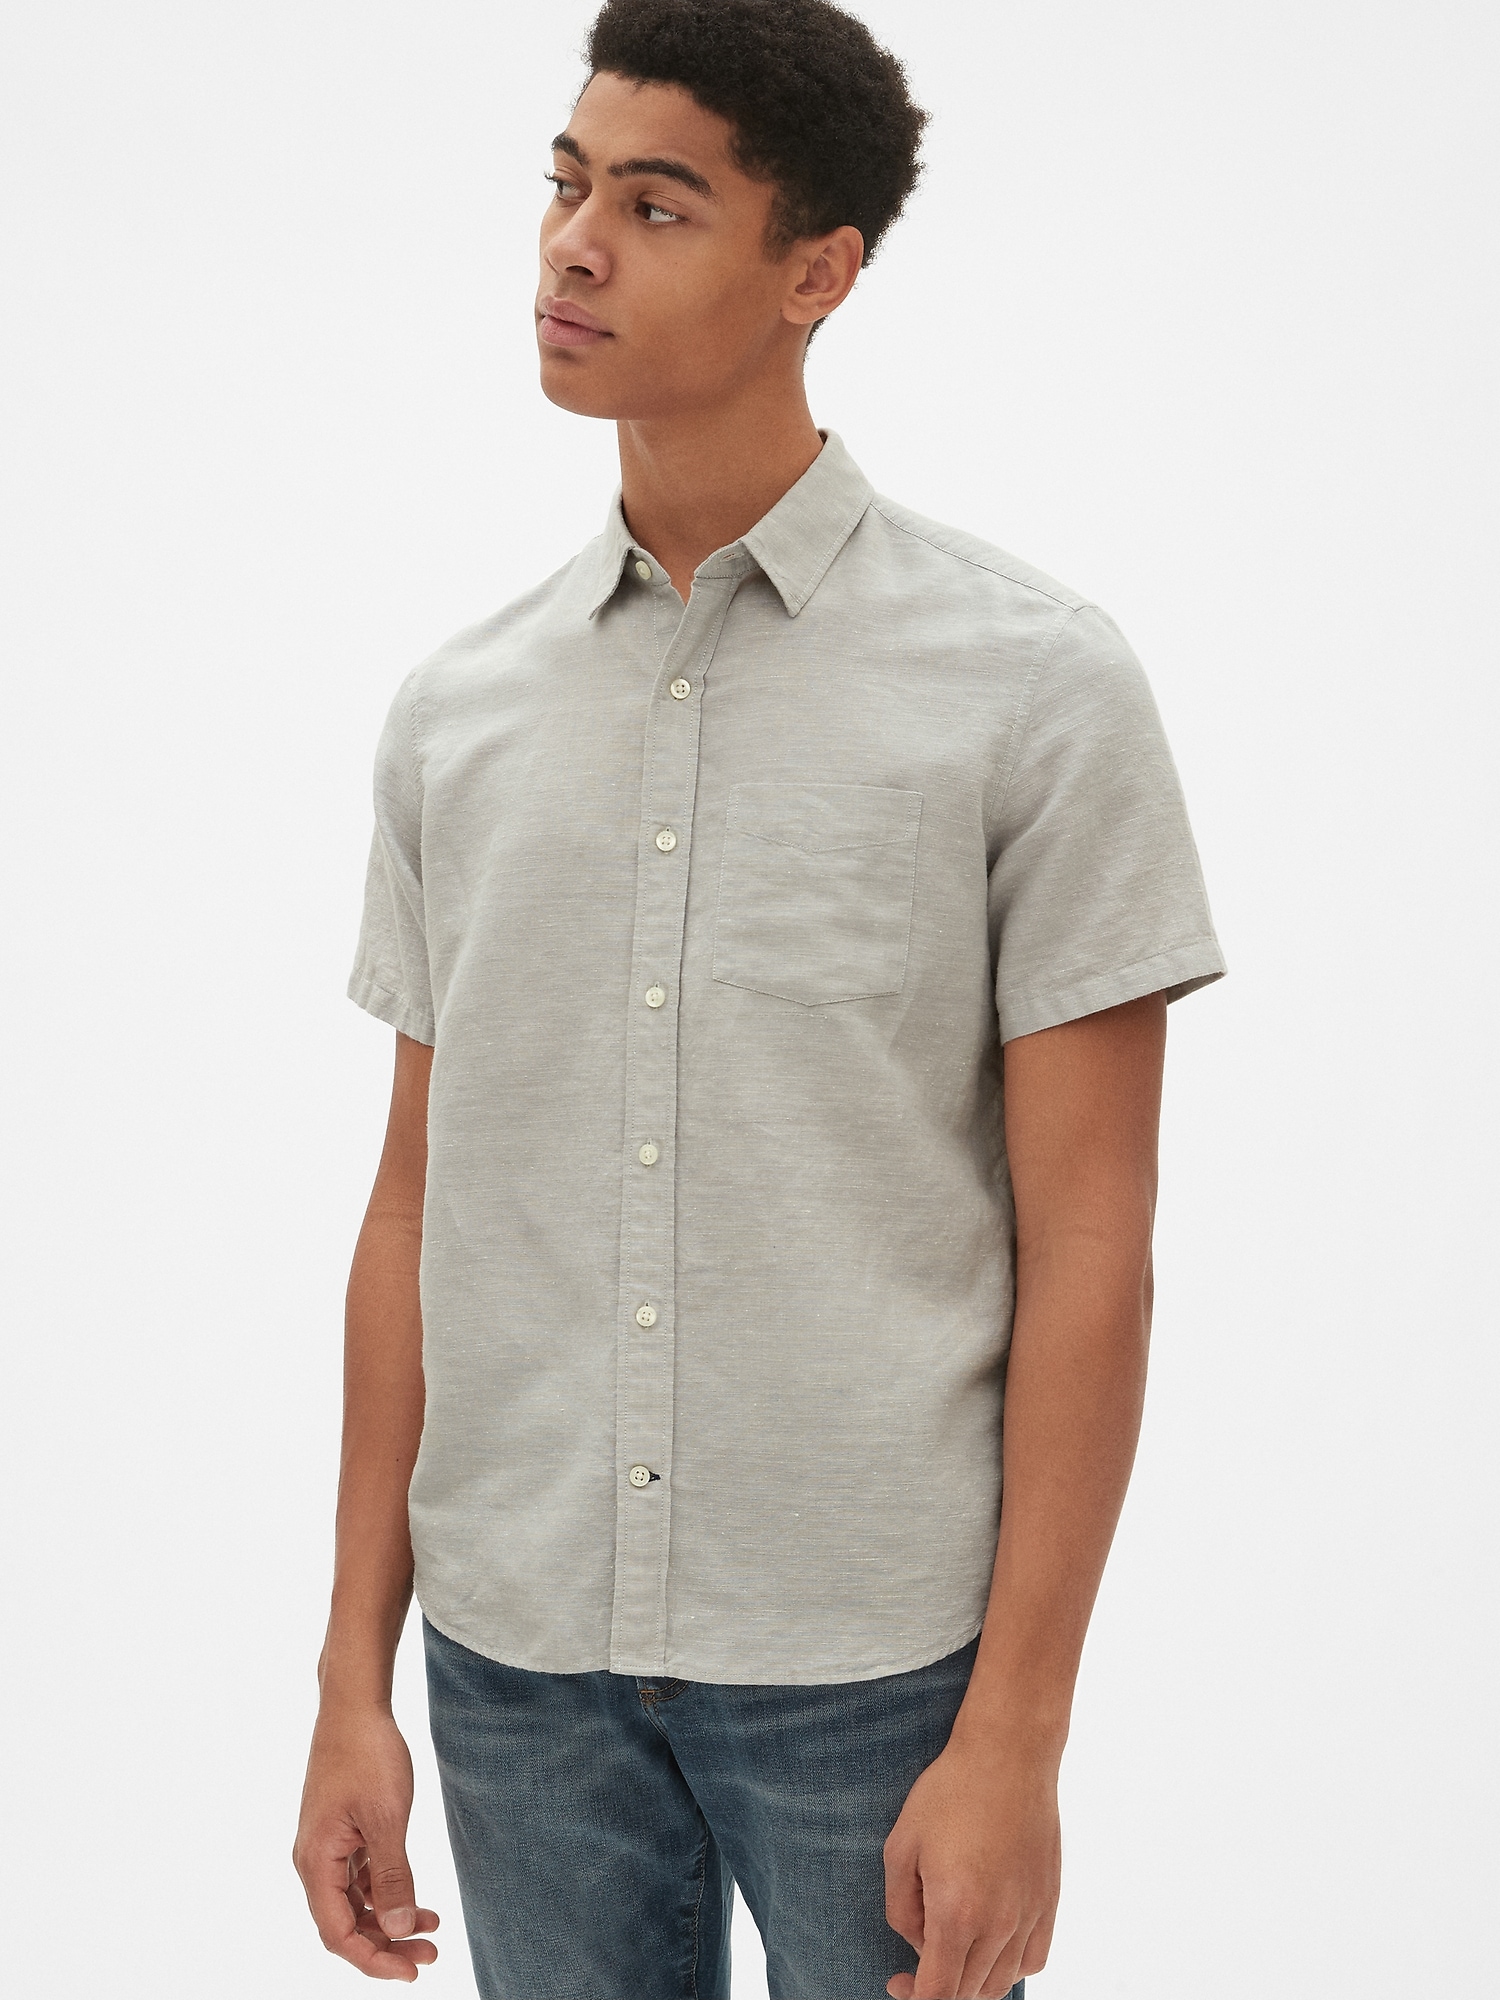 Linen-Cotton Shirt by Gap Online, THE ICONIC